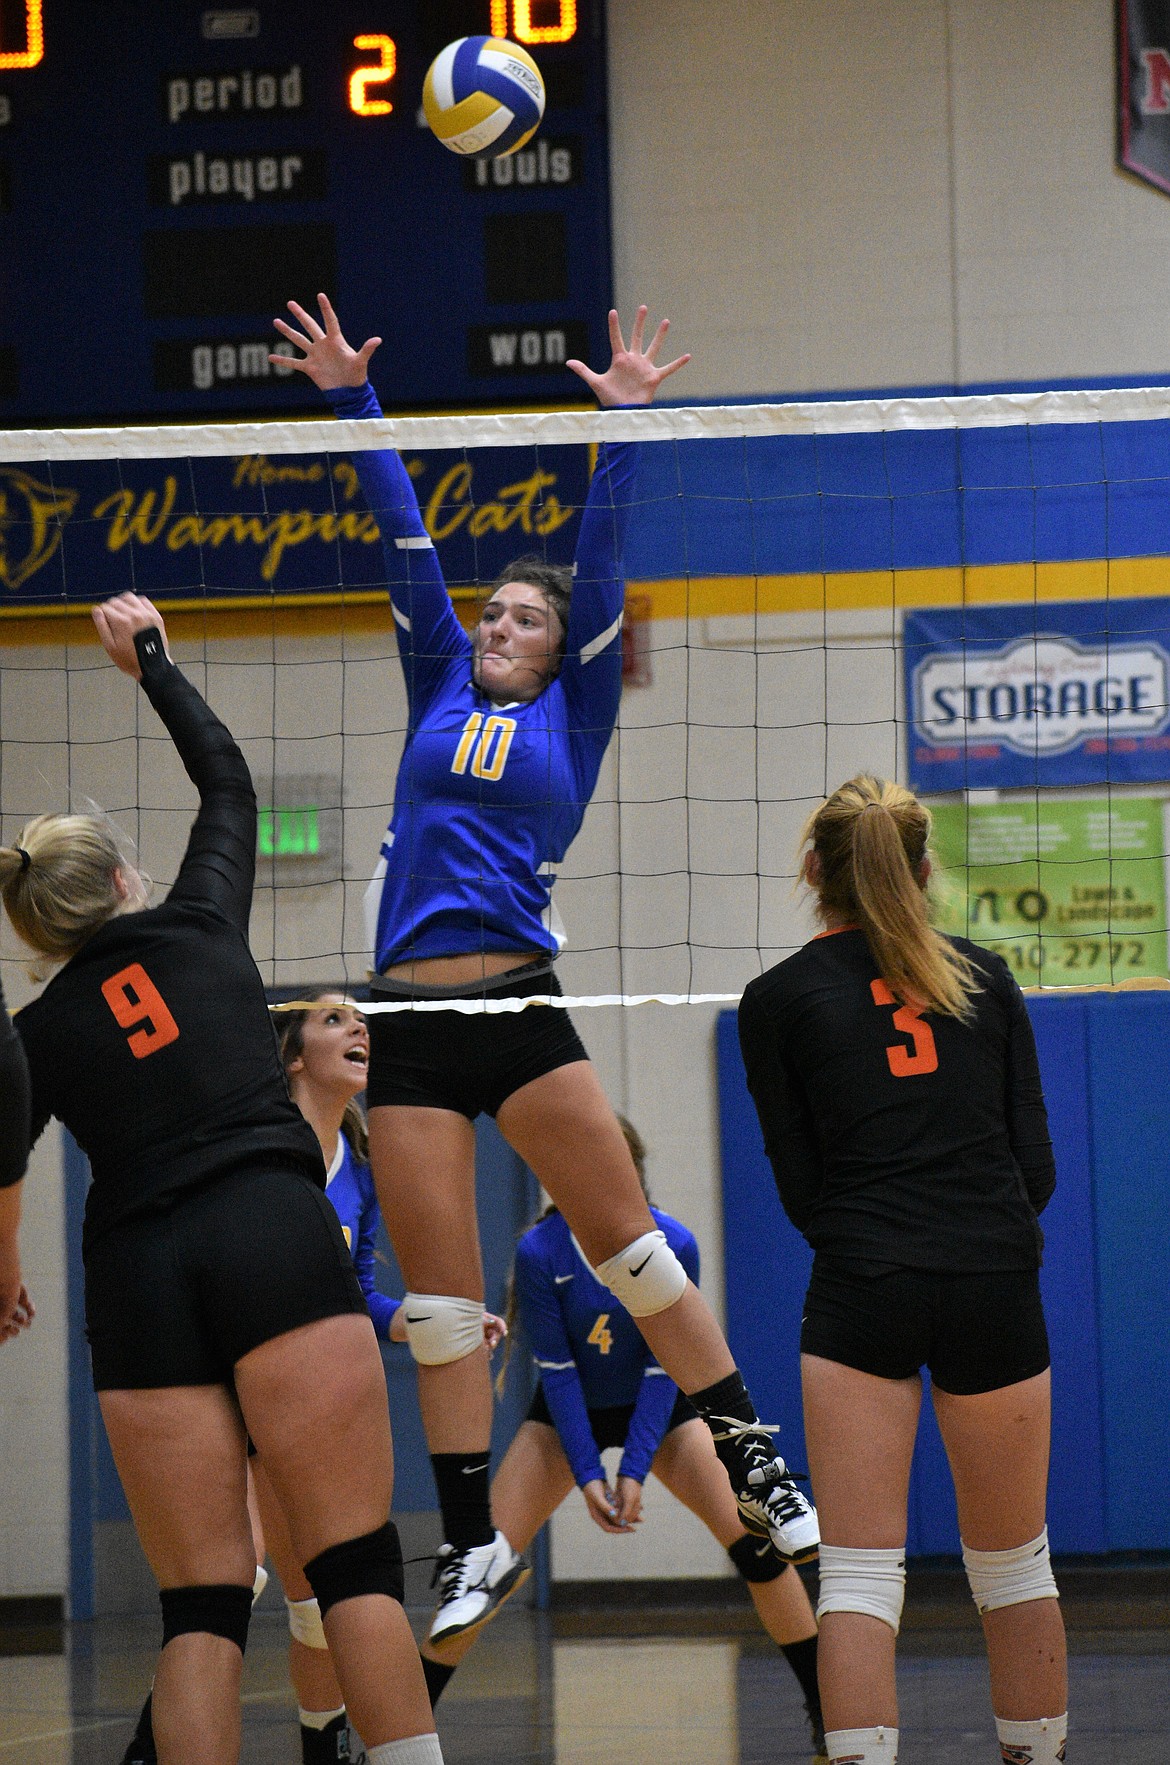 Junior Caiya Yanik elevates to make a block during a match against Priest River on Sept. 19 at CFHS.